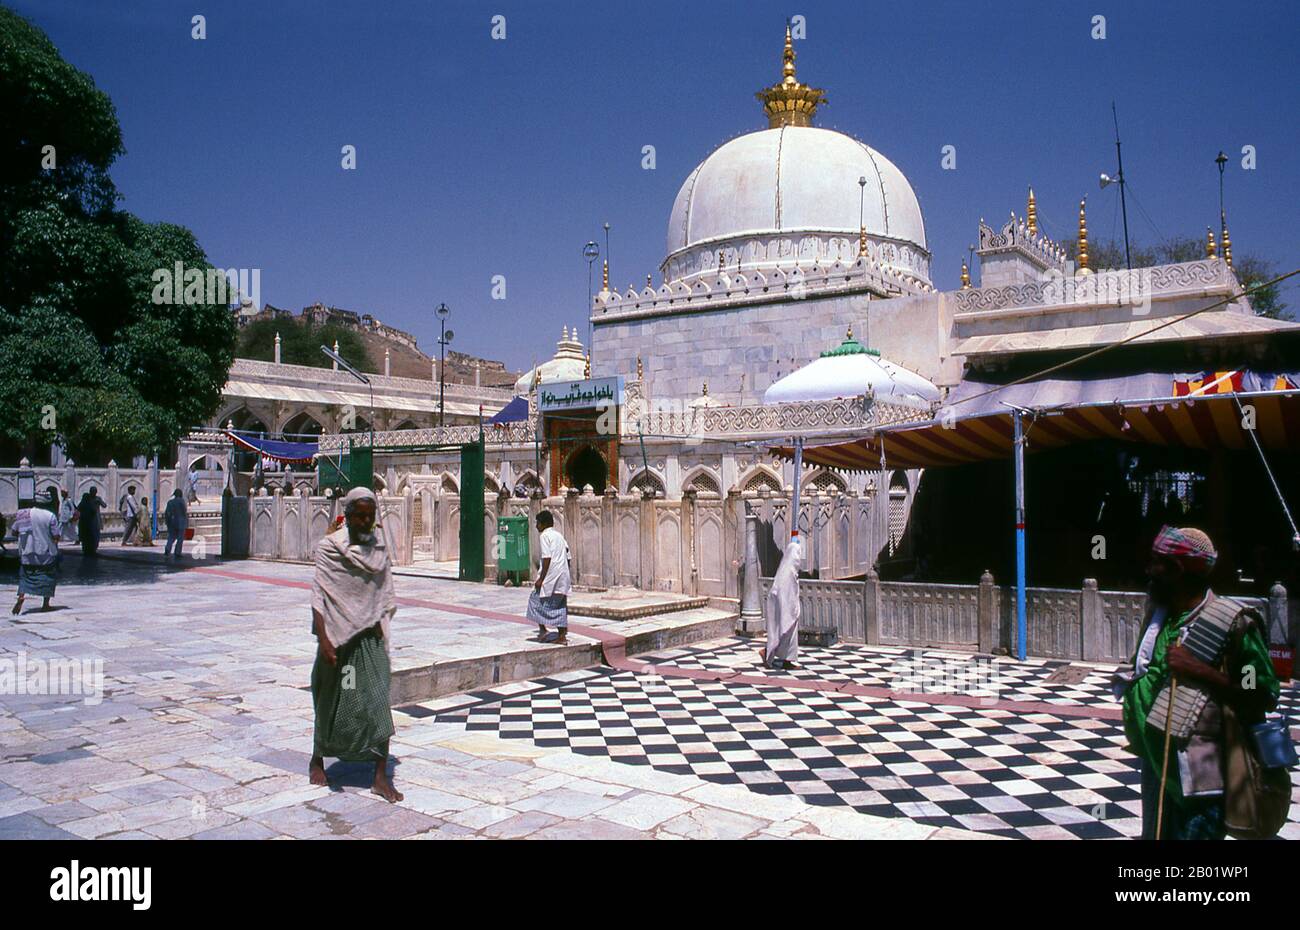 India: Pilgrims at the Dargah Sharif of Sufi saint Moinuddin Chishti, Ajmer, Rajasthan.  Sultan-ul-Hind, Moinuddin Chishti (1141-1230), also known as Gharīb Nawāz ('Benefactor of the Poor'), was the most famous Sufi saint of the Chishti Order of the Indian Subcontinent. He introduced and established the order in South Asia.  Ajmer (Sanskrit: Ajayameru) was founded in the late 7th century CE by Dushyant Chauhan. The Chauhan dynasty ruled Ajmer in spite of repeated invasions by Turkic marauders from Central Asia across the north of India. Stock Photo